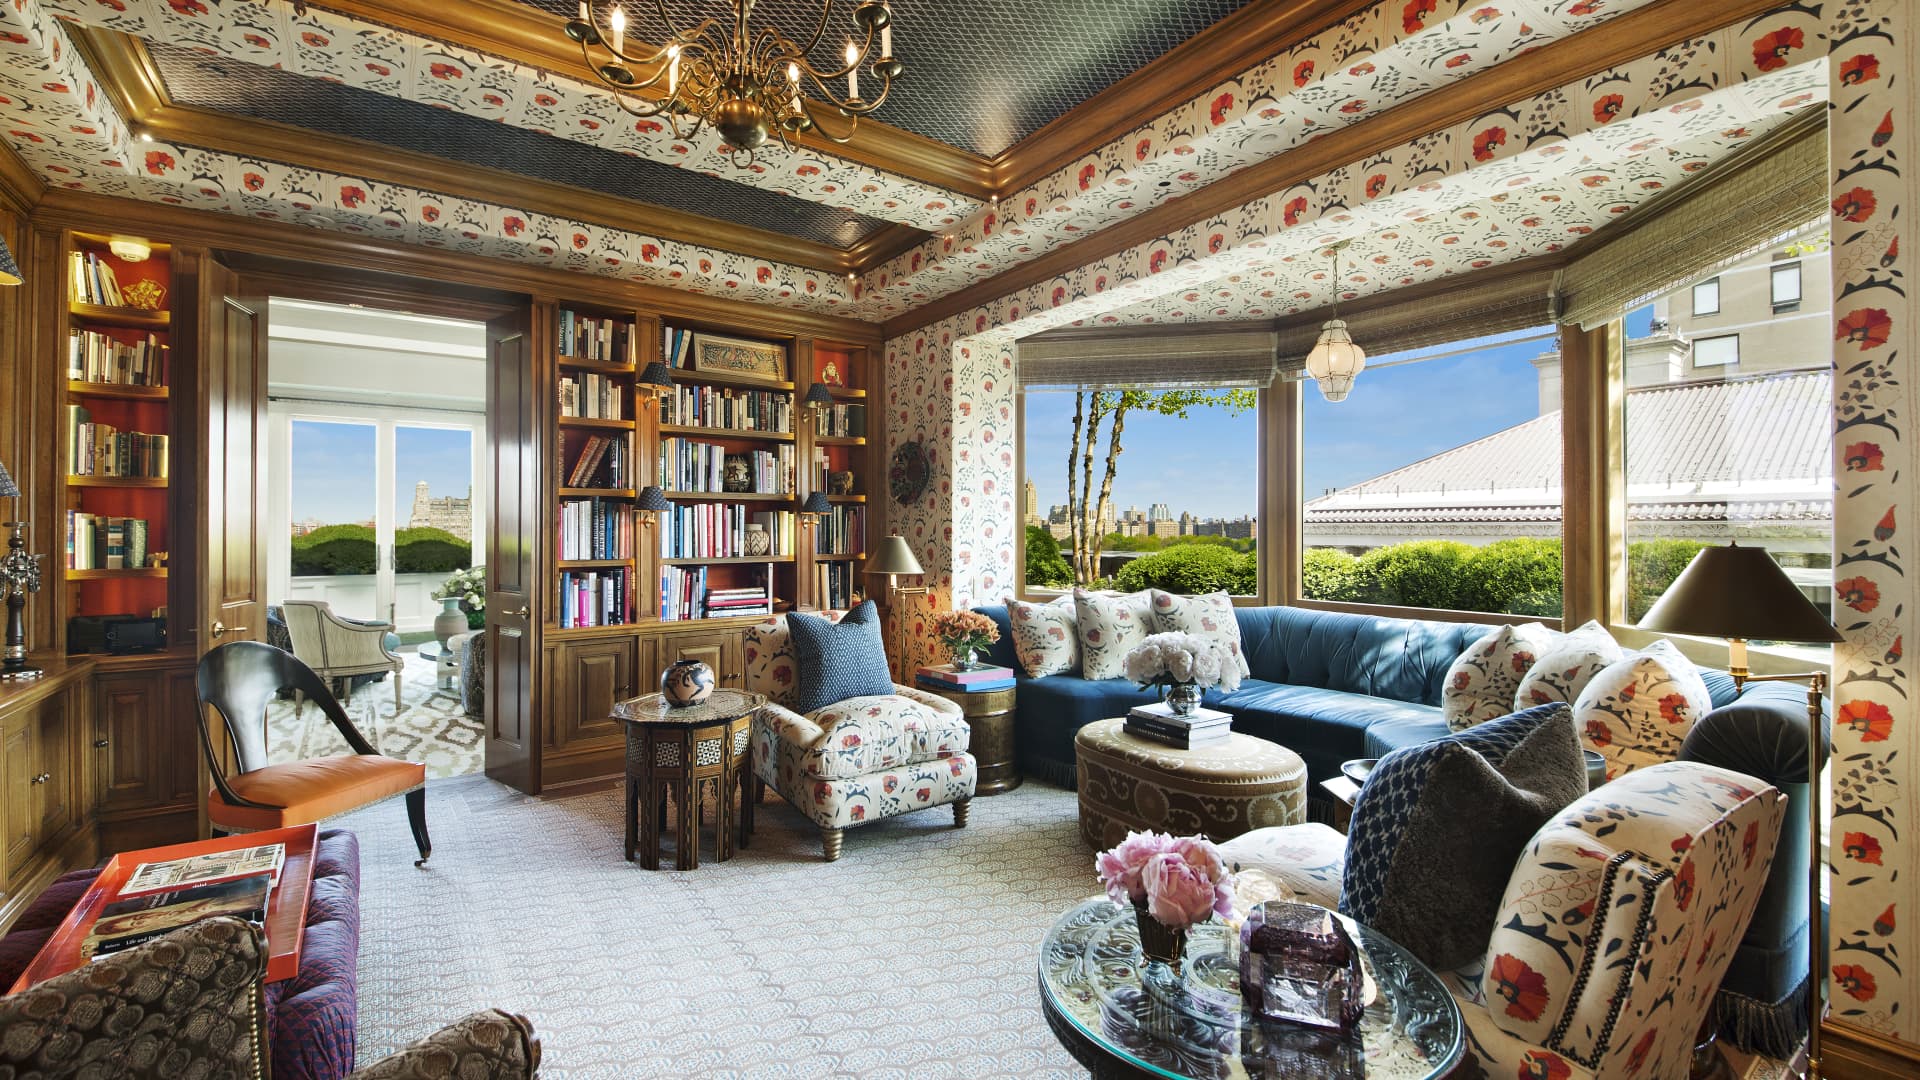 The wood-paneled library has upholstered walls with views of Central Park.